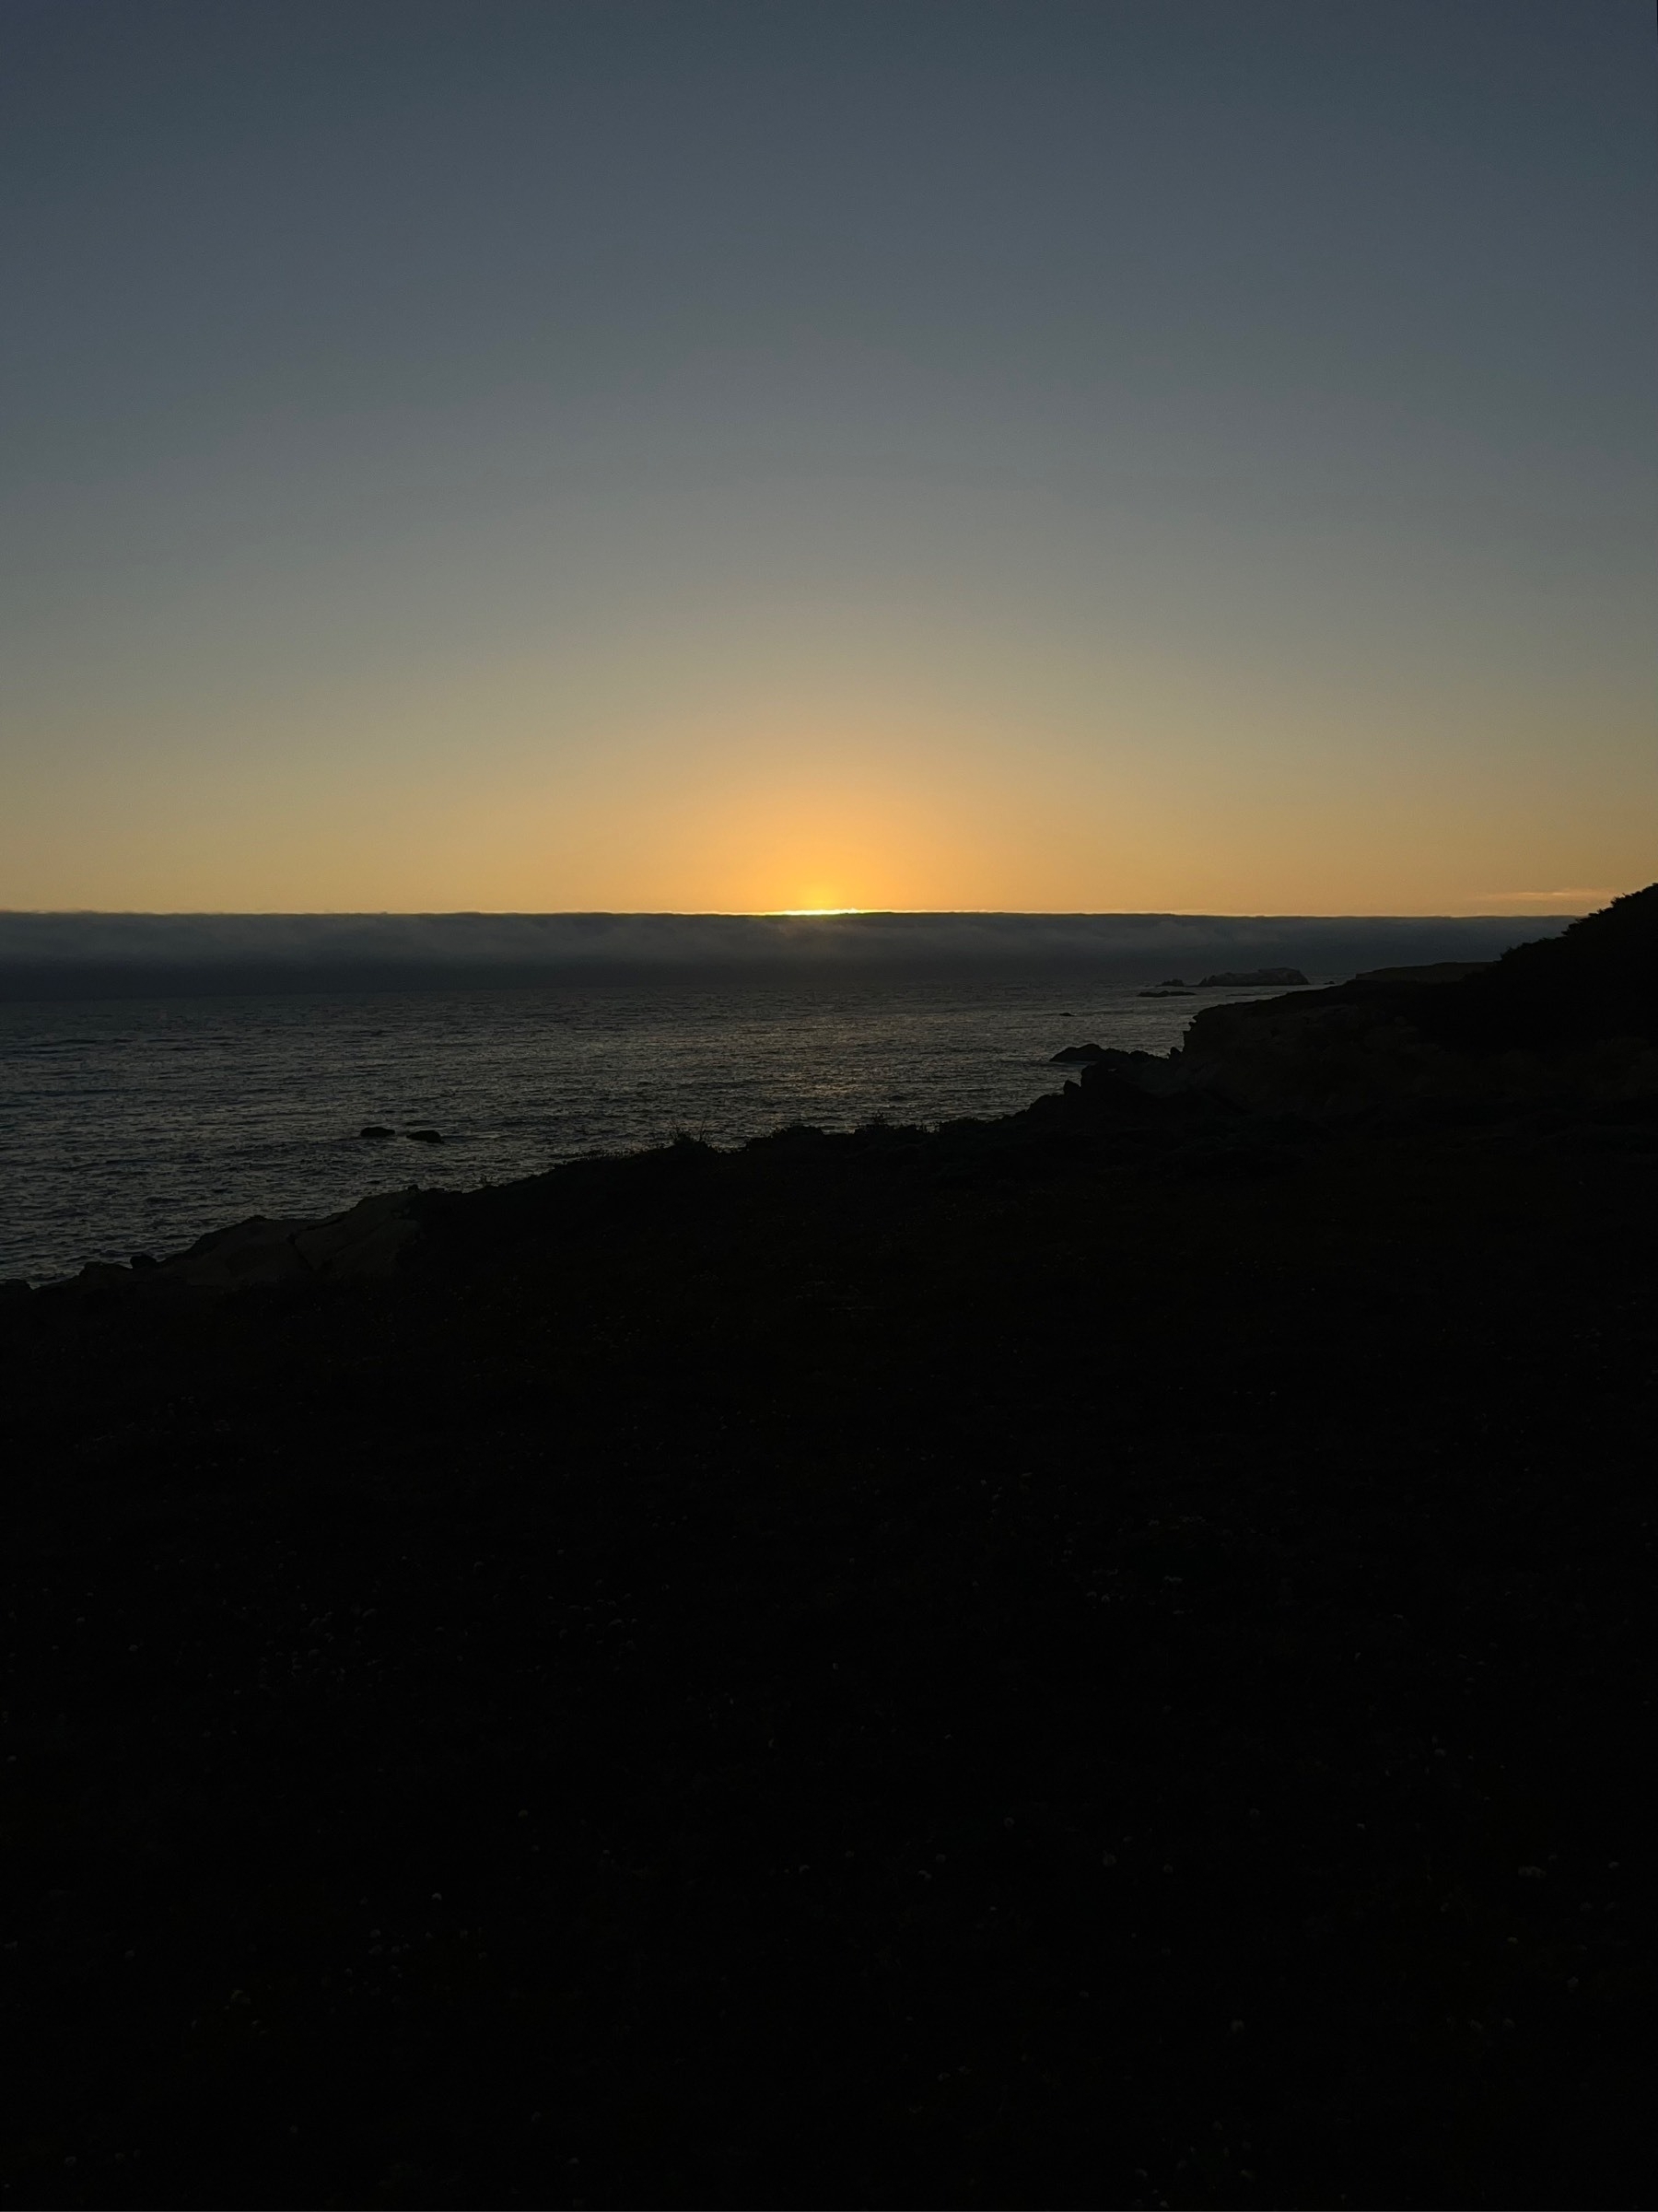 Sunset over the Pacific Ocean from the cliffs at Sea Ranch, California